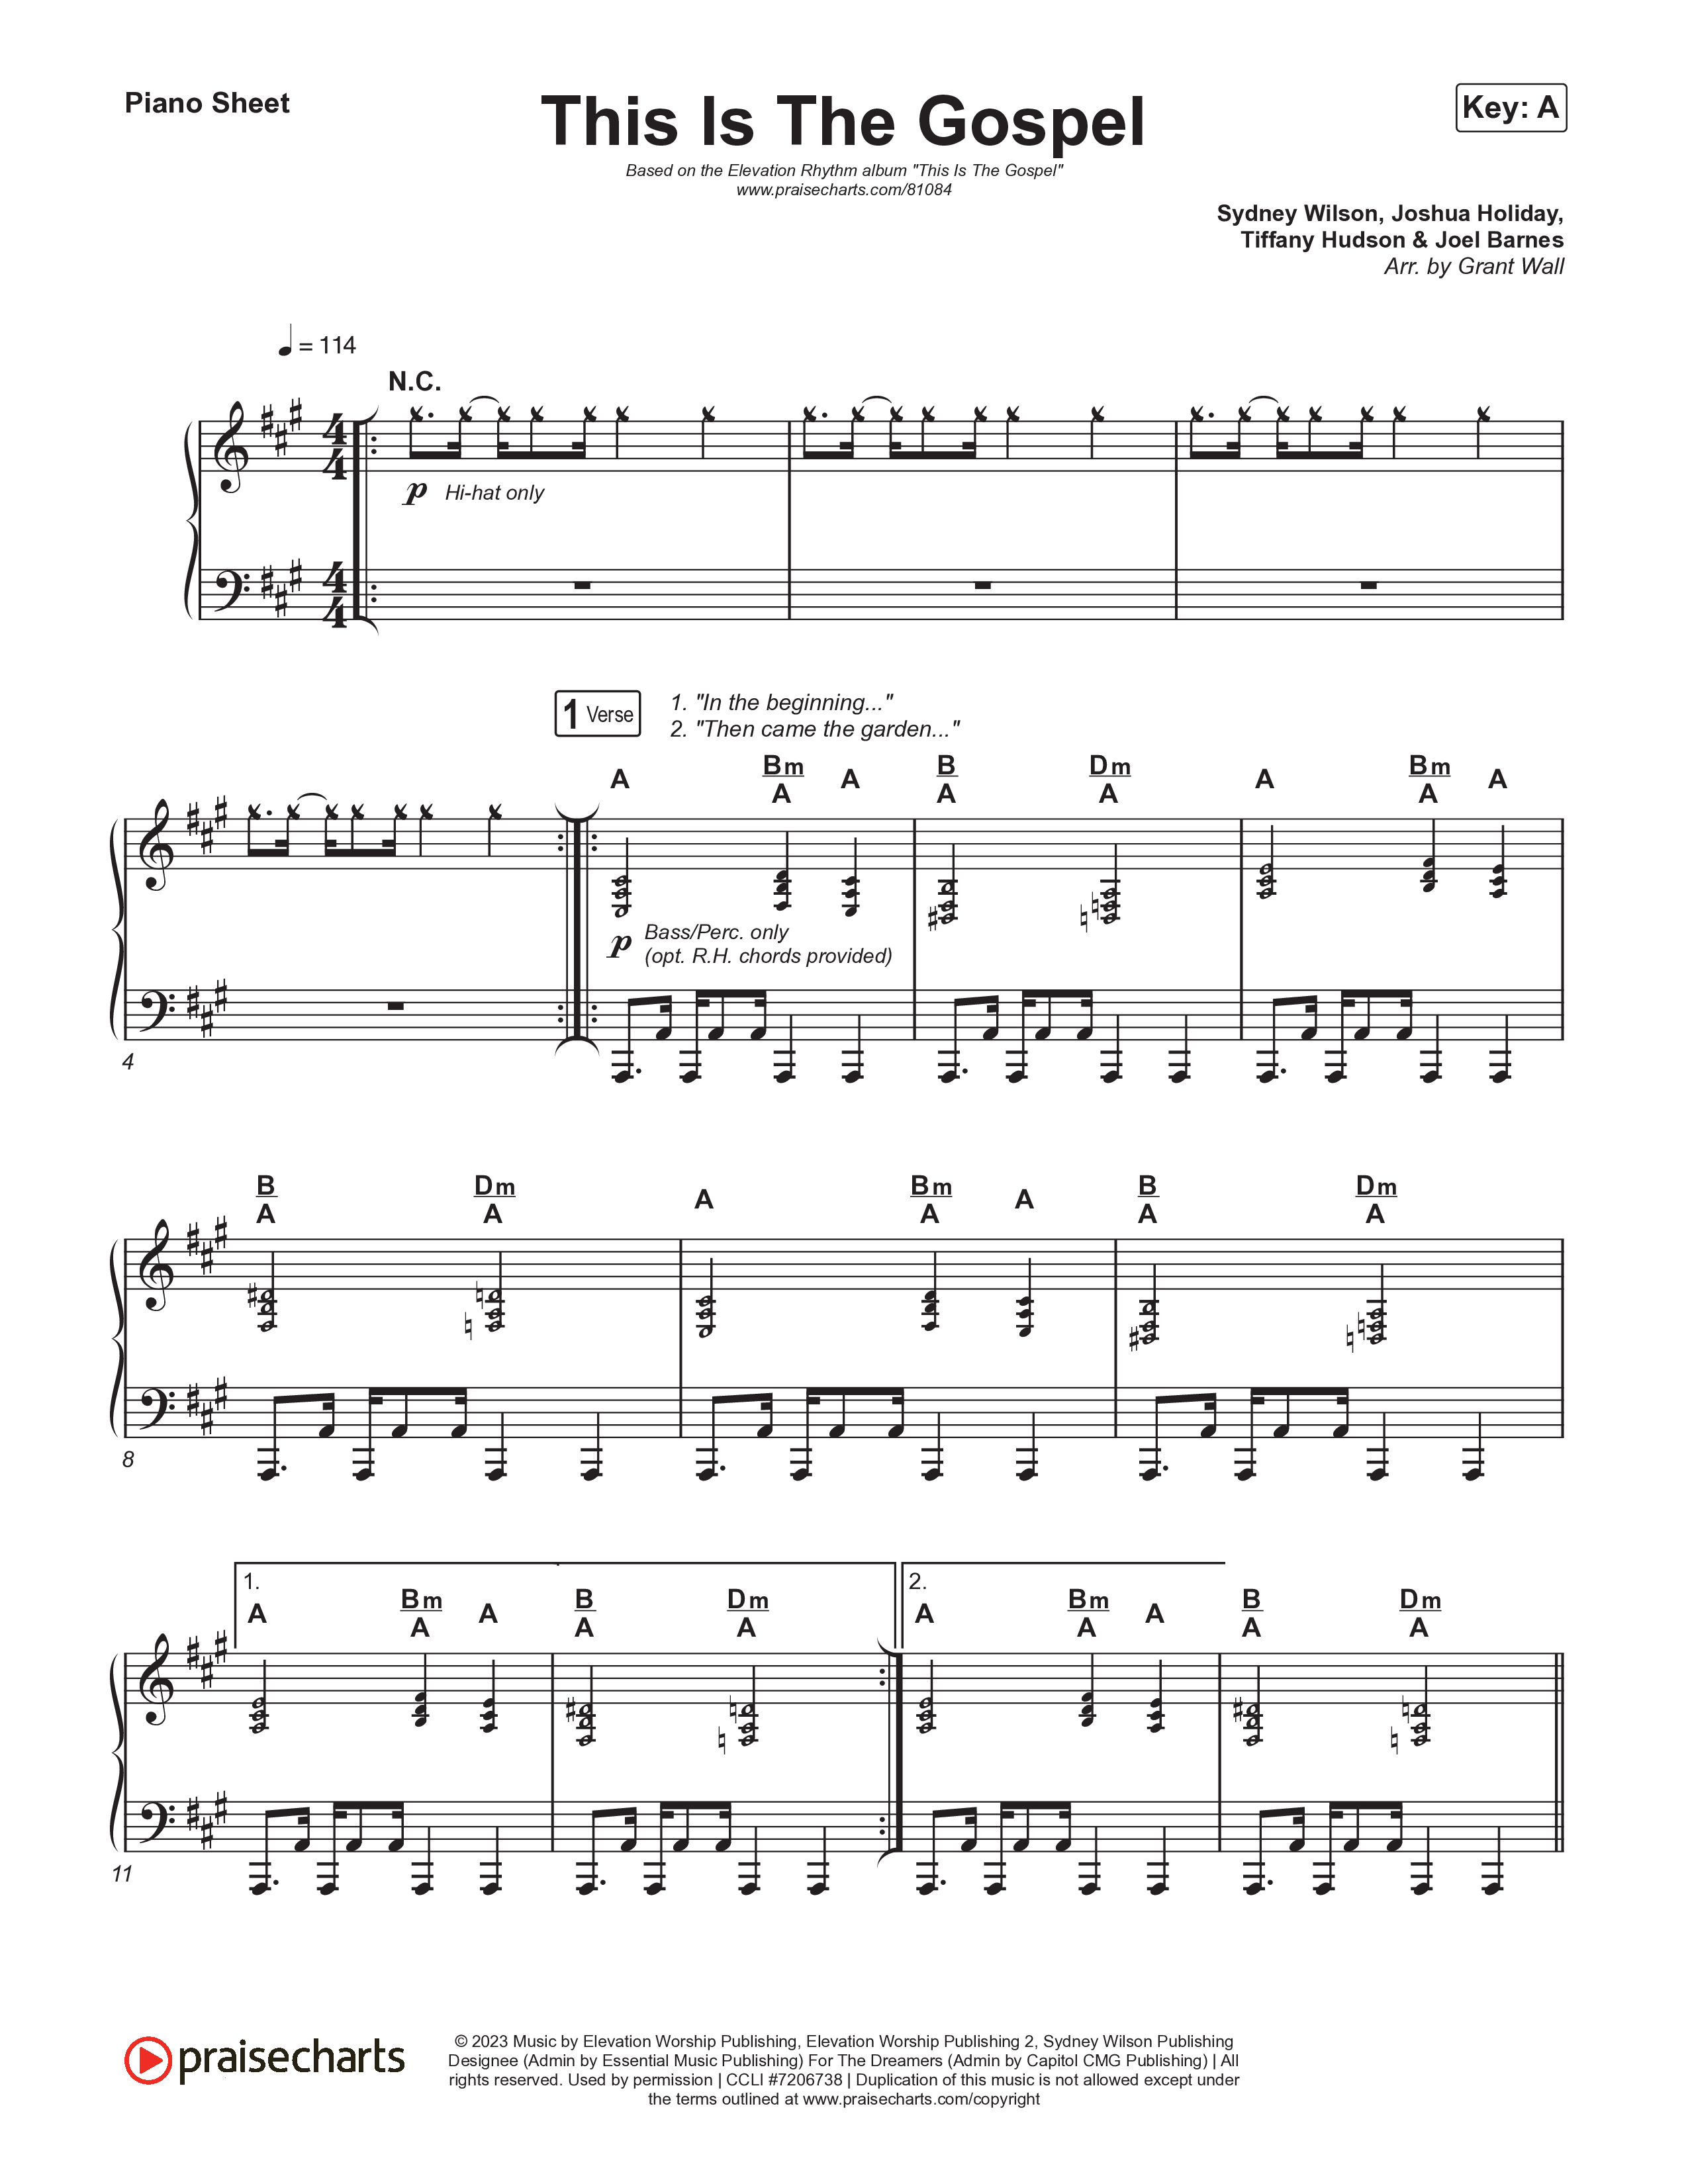 This Is The Gospel Piano Sheet (ELEVATION RHYTHM)